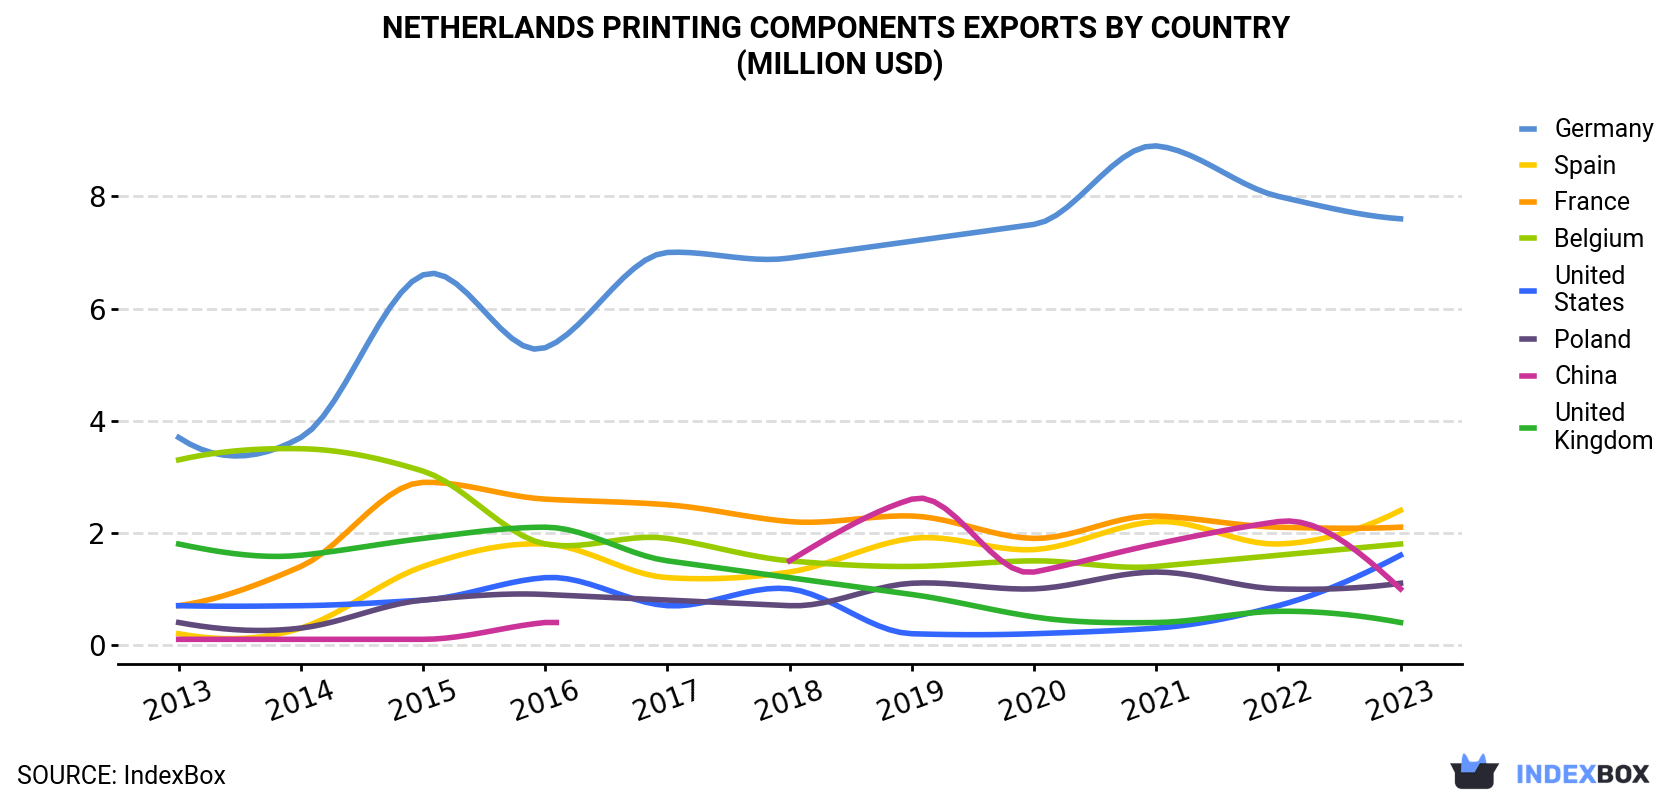 Netherlands Printing Components Exports By Country (Million USD)